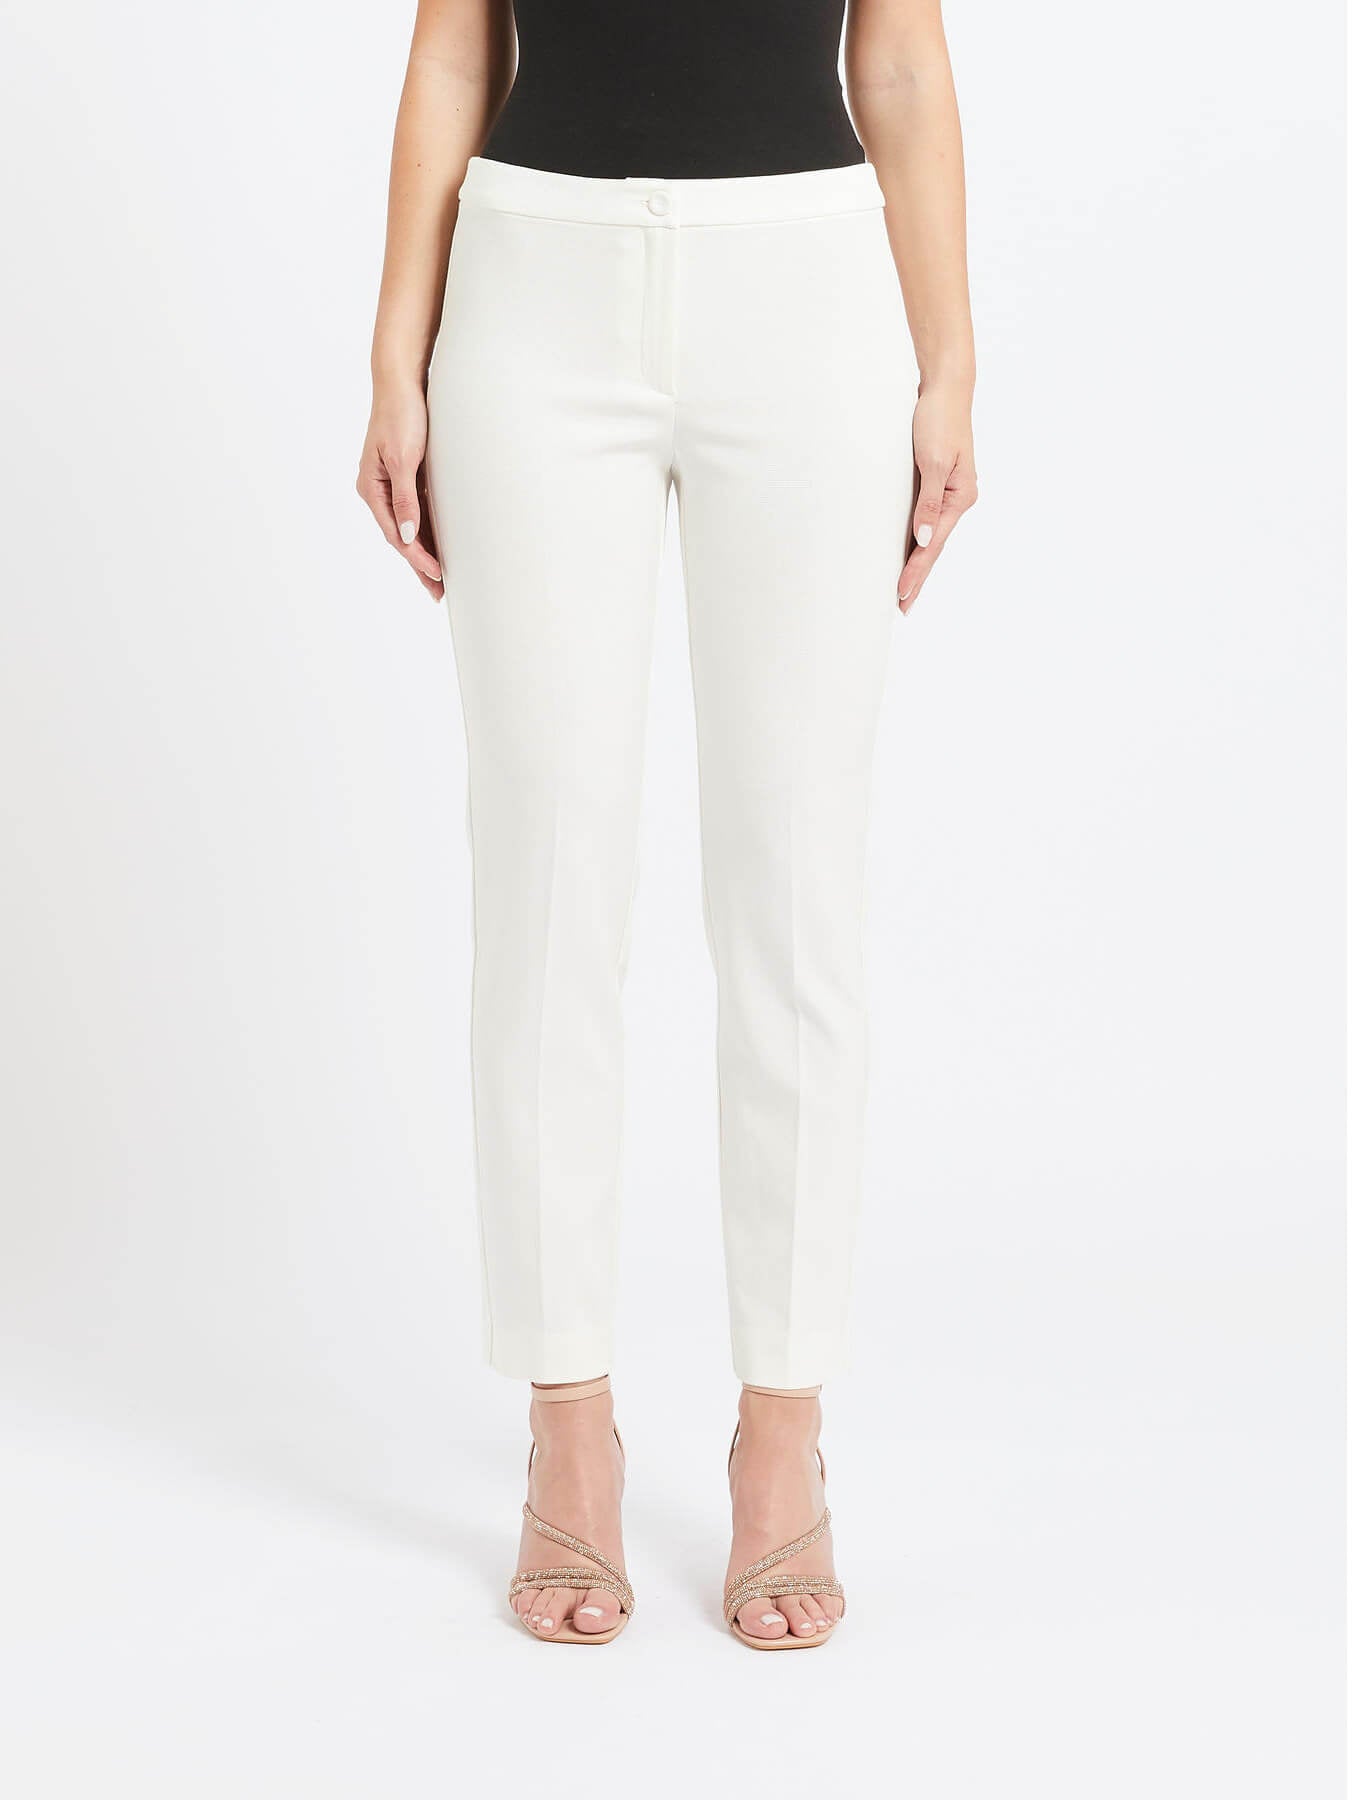 Penny Black Trousers Regular Fit | White